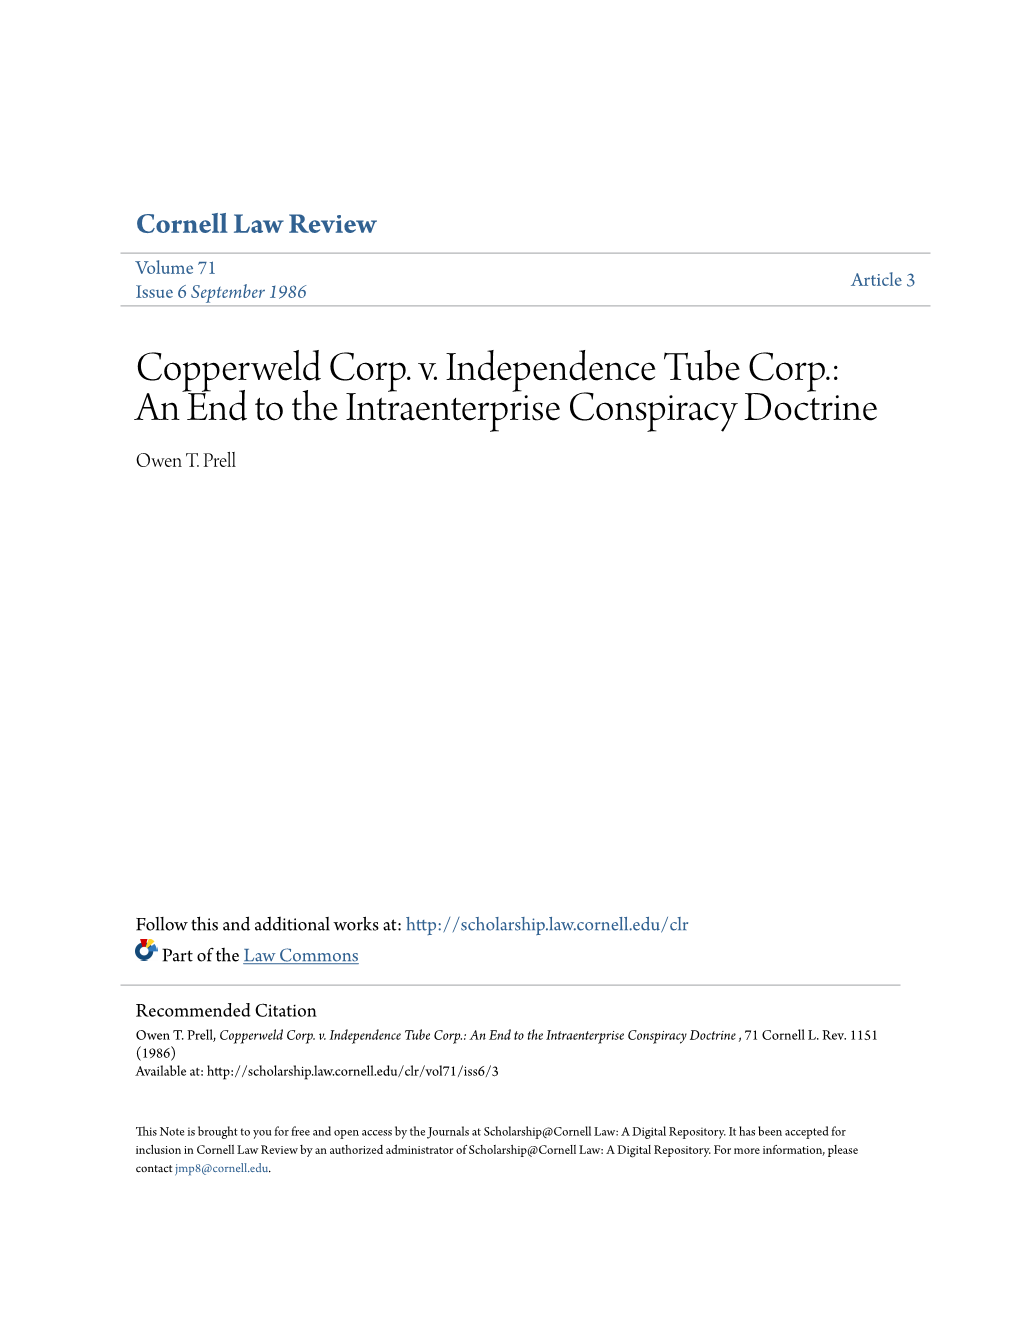 Copperweld Corp. V. Independence Tube Corp.: an End to the Intraenterprise Conspiracy Doctrine Owen T